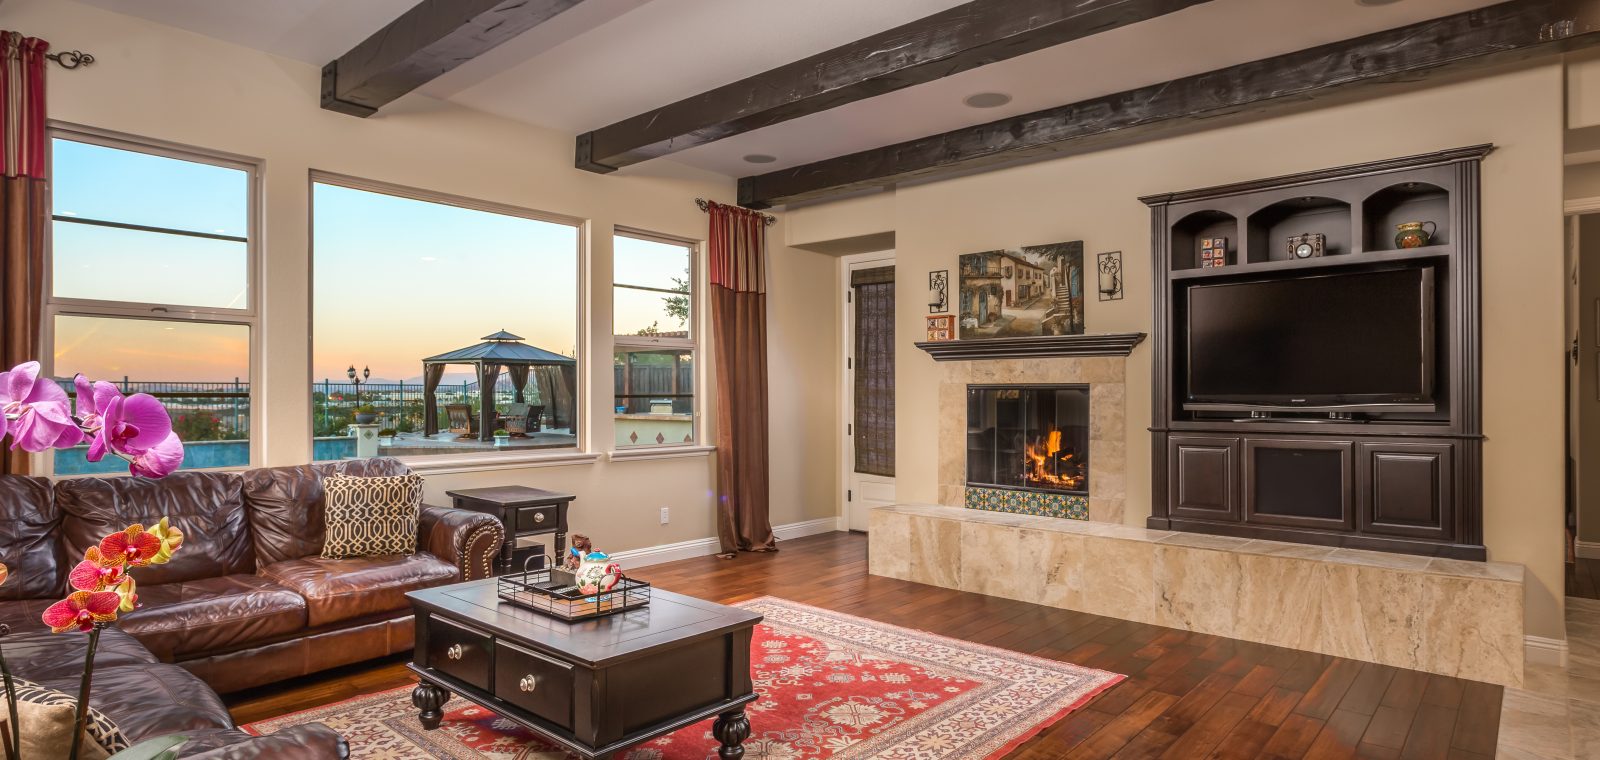 Living Room View - Blumenfeld Group | San Diego Homes for Sale